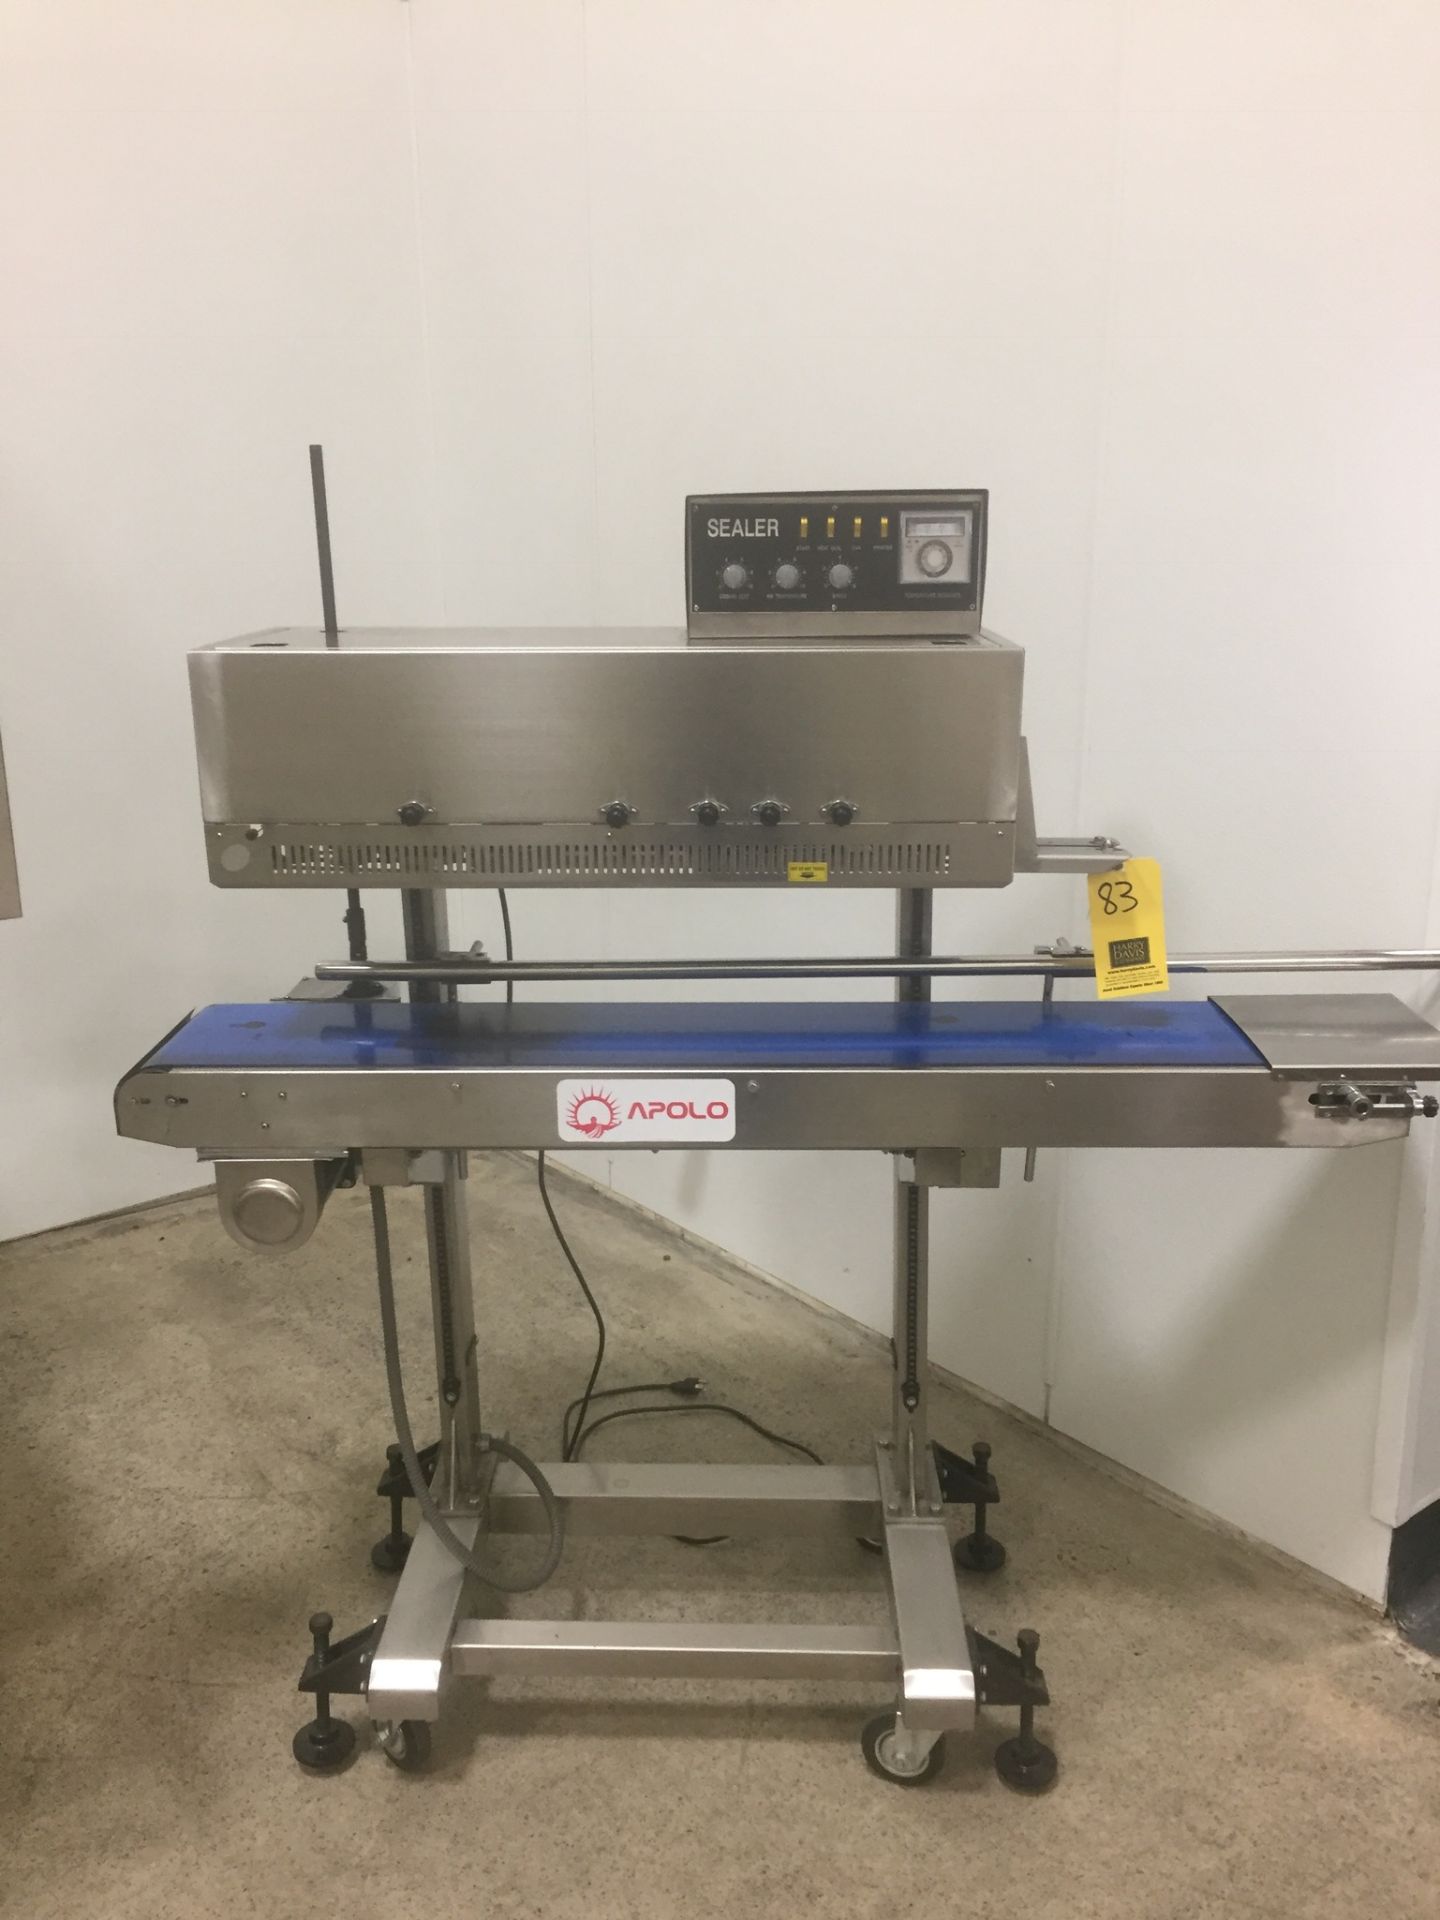 Apolo Solid-Ink Coding Continuous Band Sealer Model CBS1010-C1 : SN 9550138, Mounted on Portable